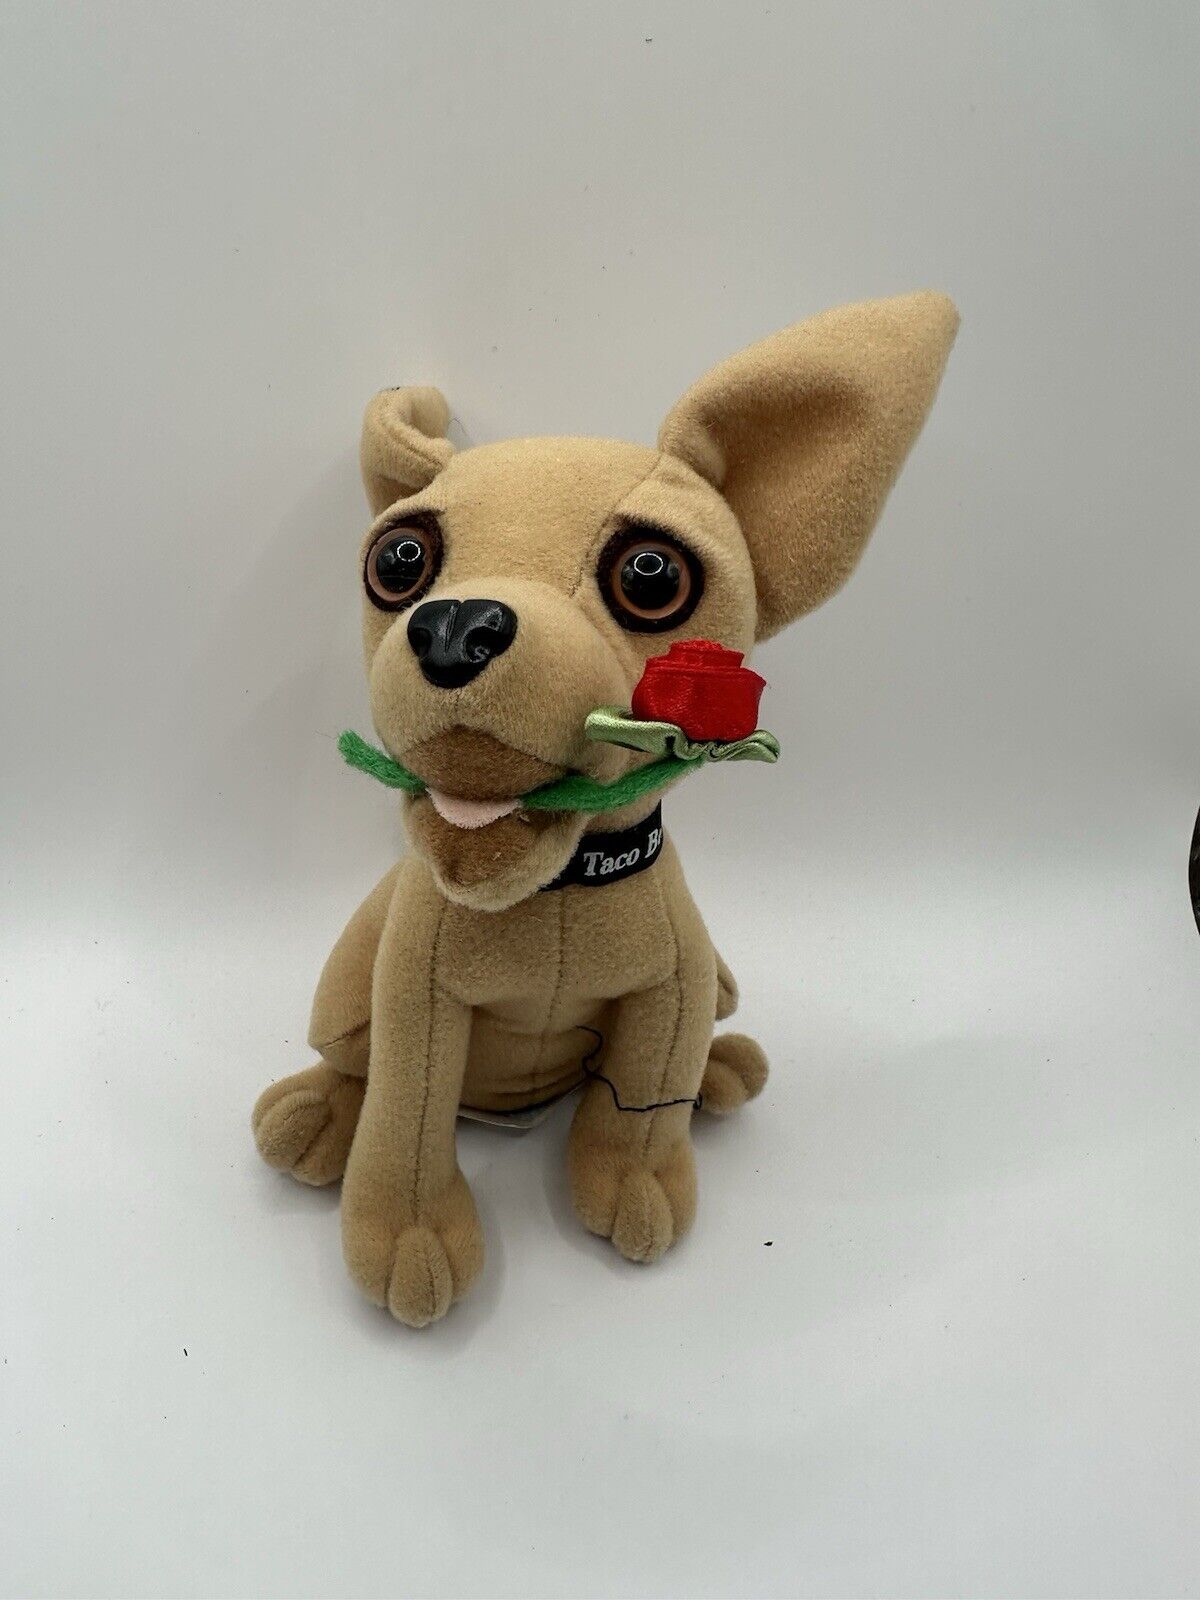 Yo Quiero Taco Bell Chihuahua Dog with Rose Plush Toy Vintage No Sound